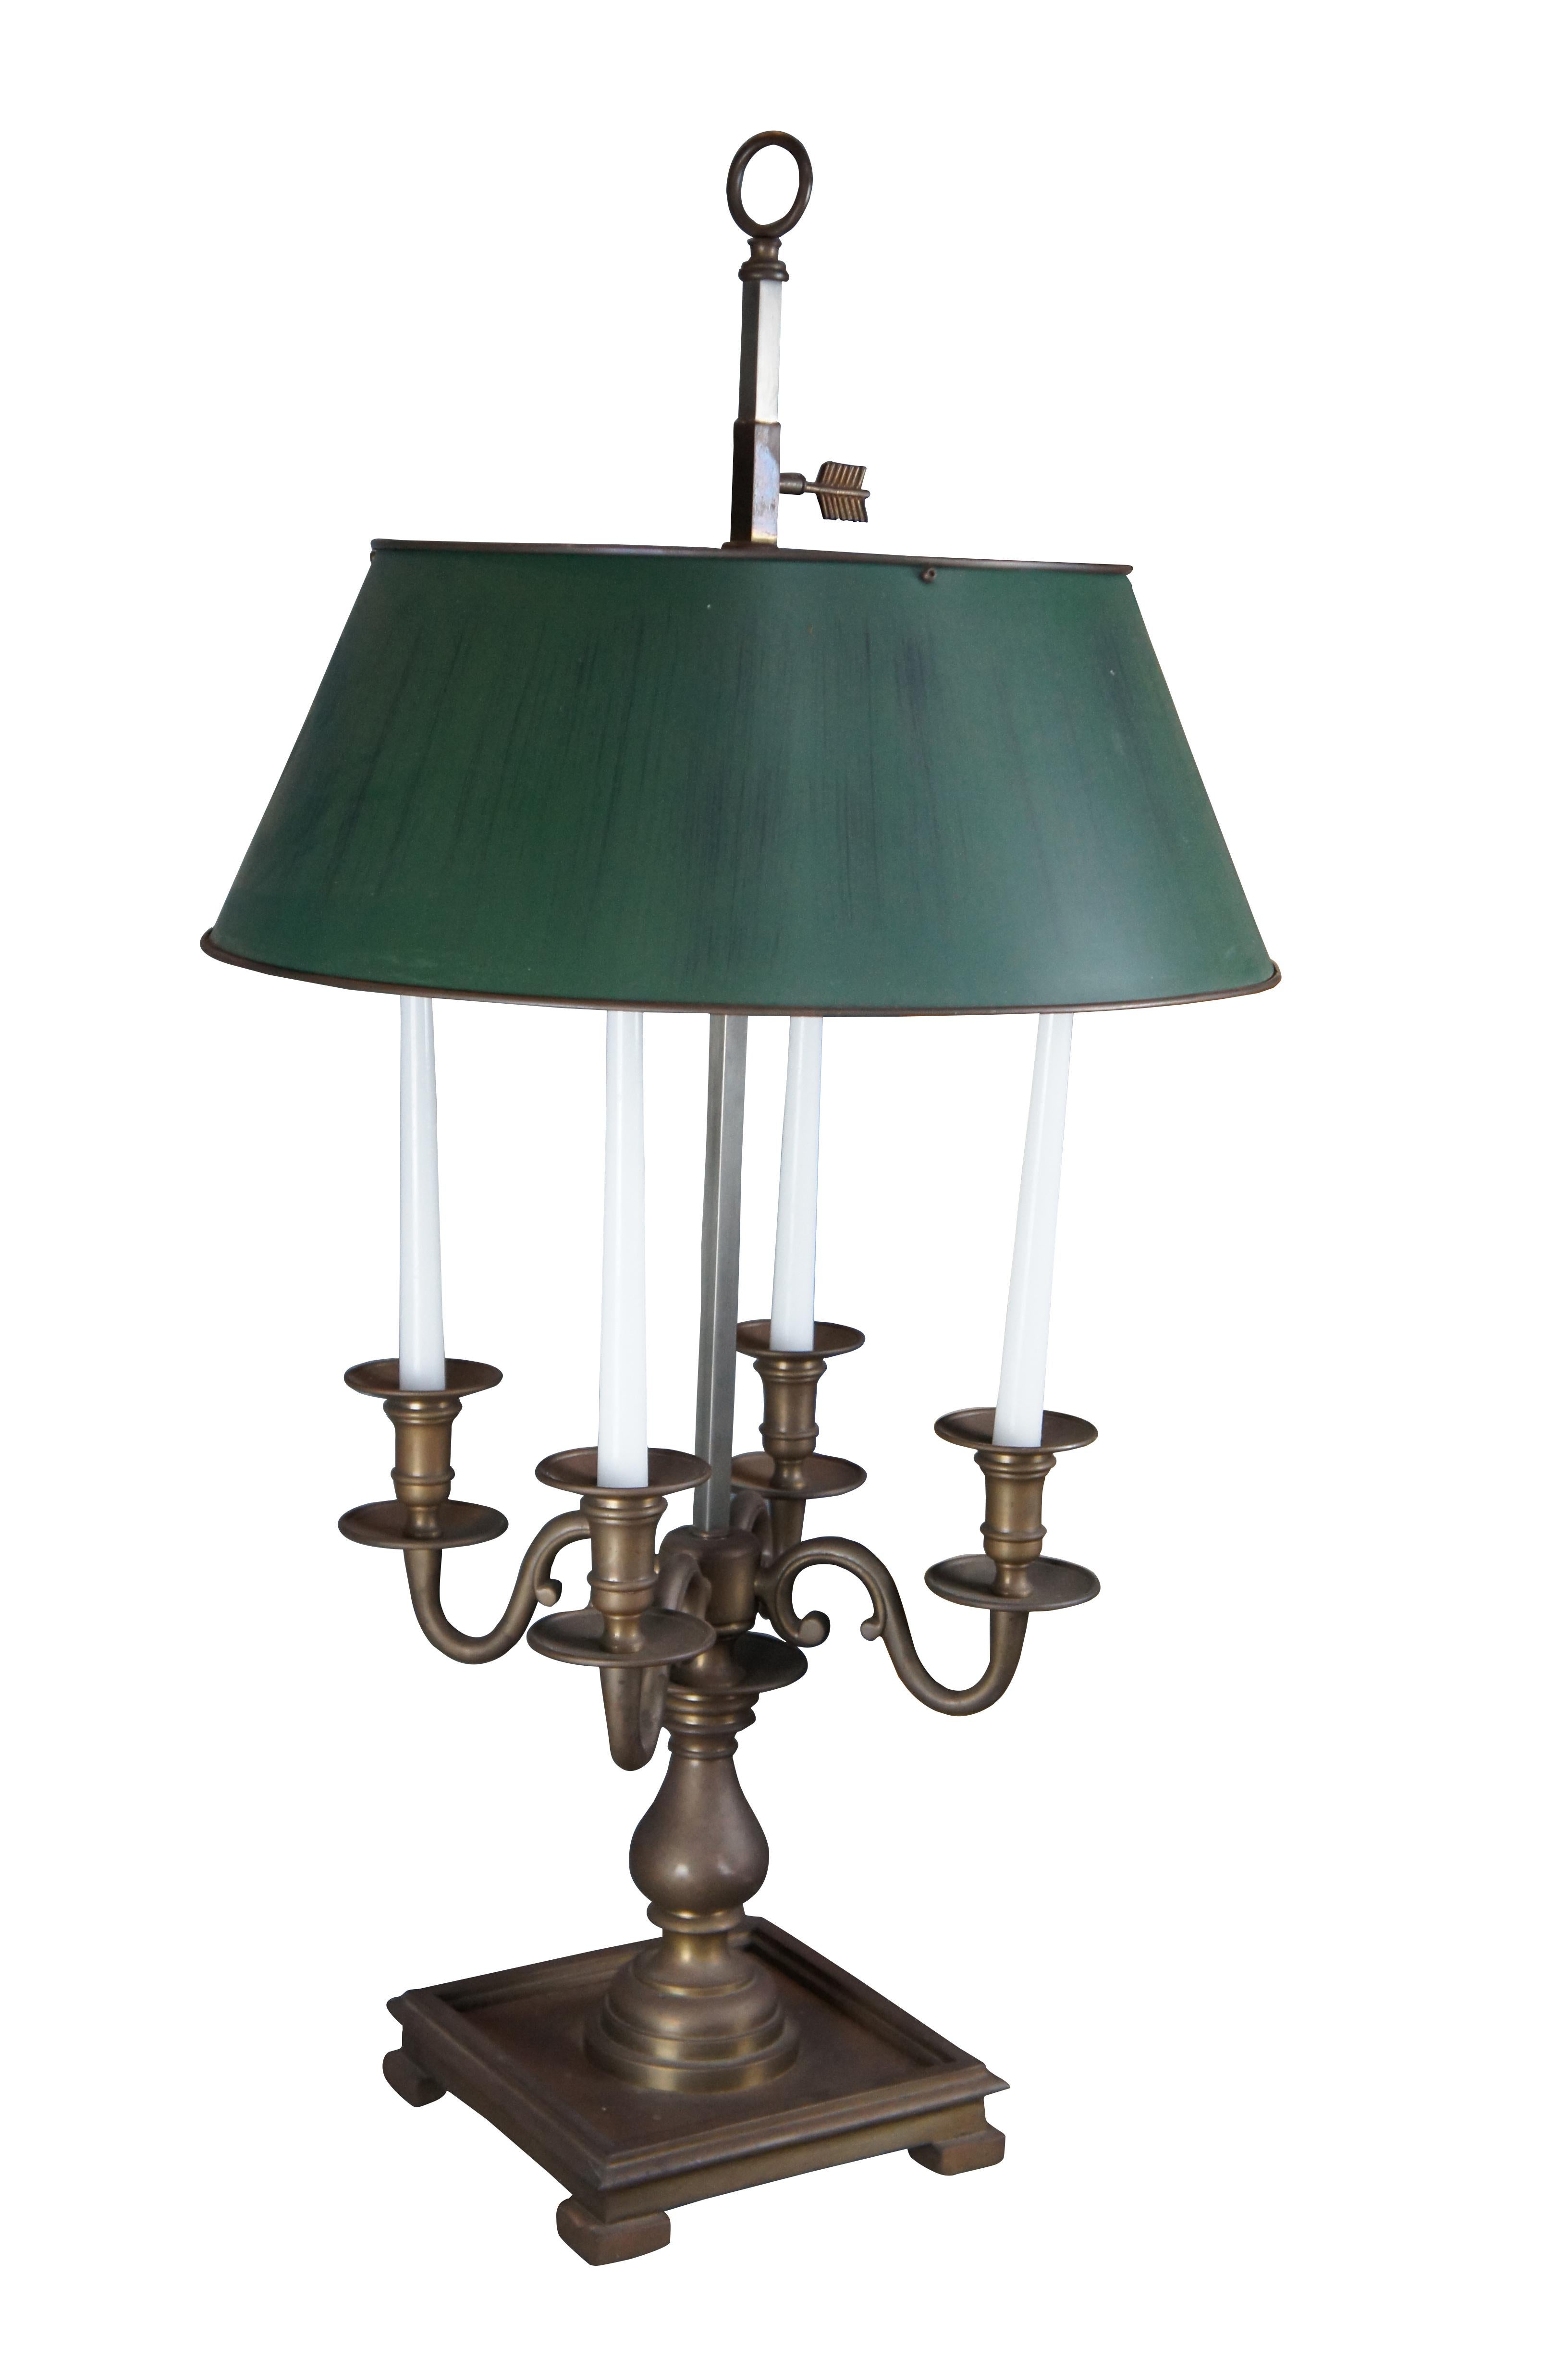 Large and Impressive late 20th century French inspired Bouillotte lamp by Visual Comfort. Features a four arm candelabra over baluster support and square footed base. The lamp features a square shaped column with adjustable brass tole shade finished